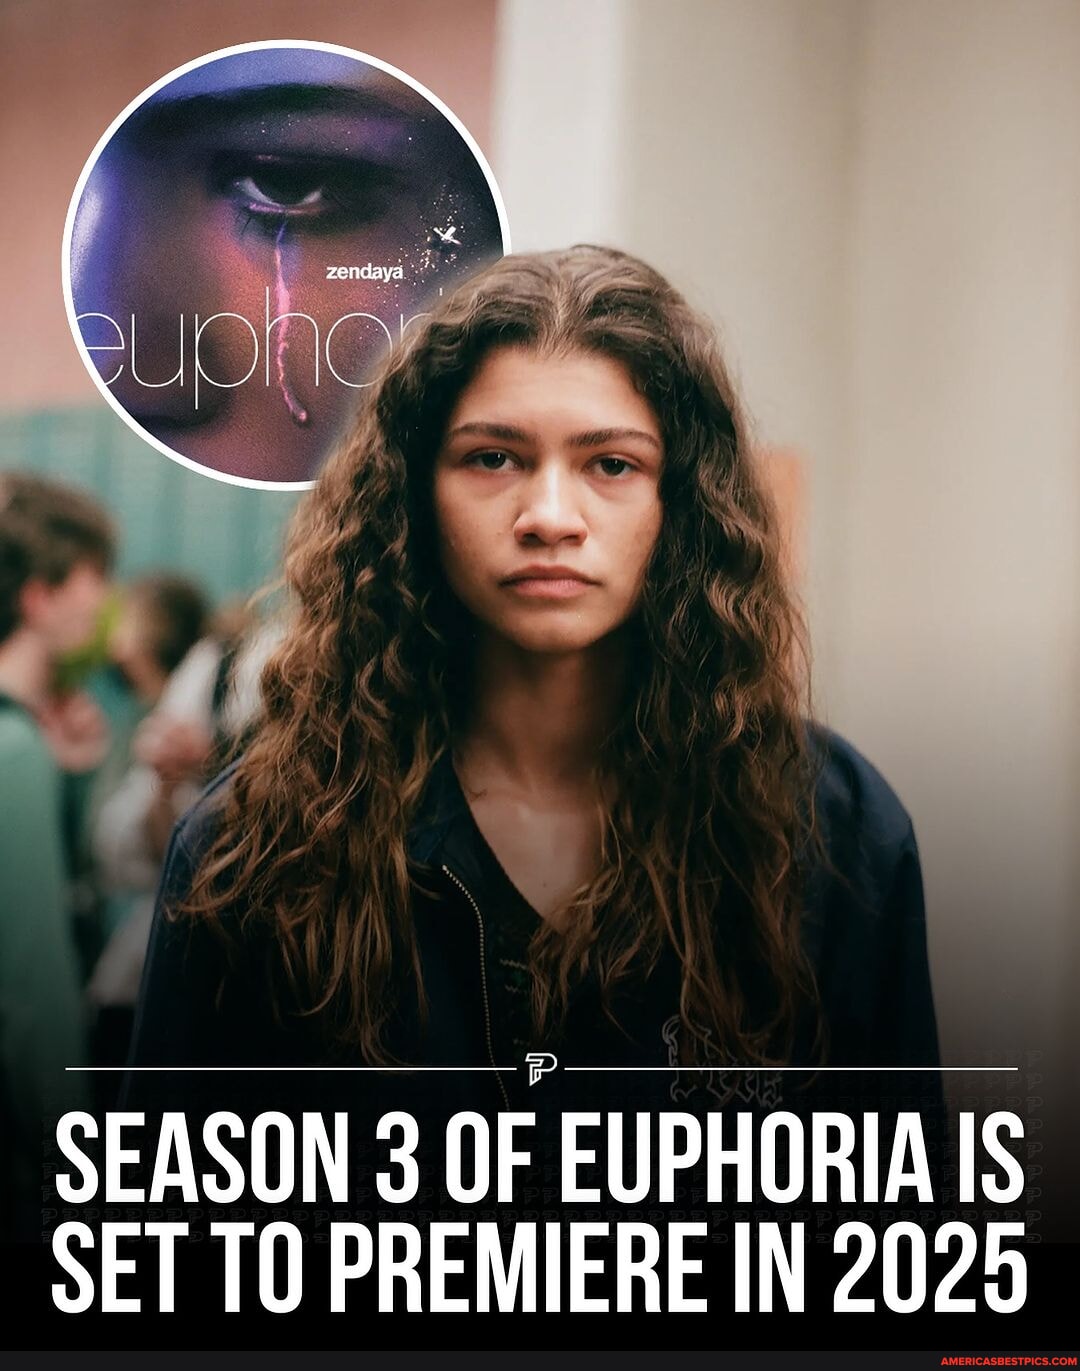 The third season of "Euphoria" is set to premiere in 2025, according to